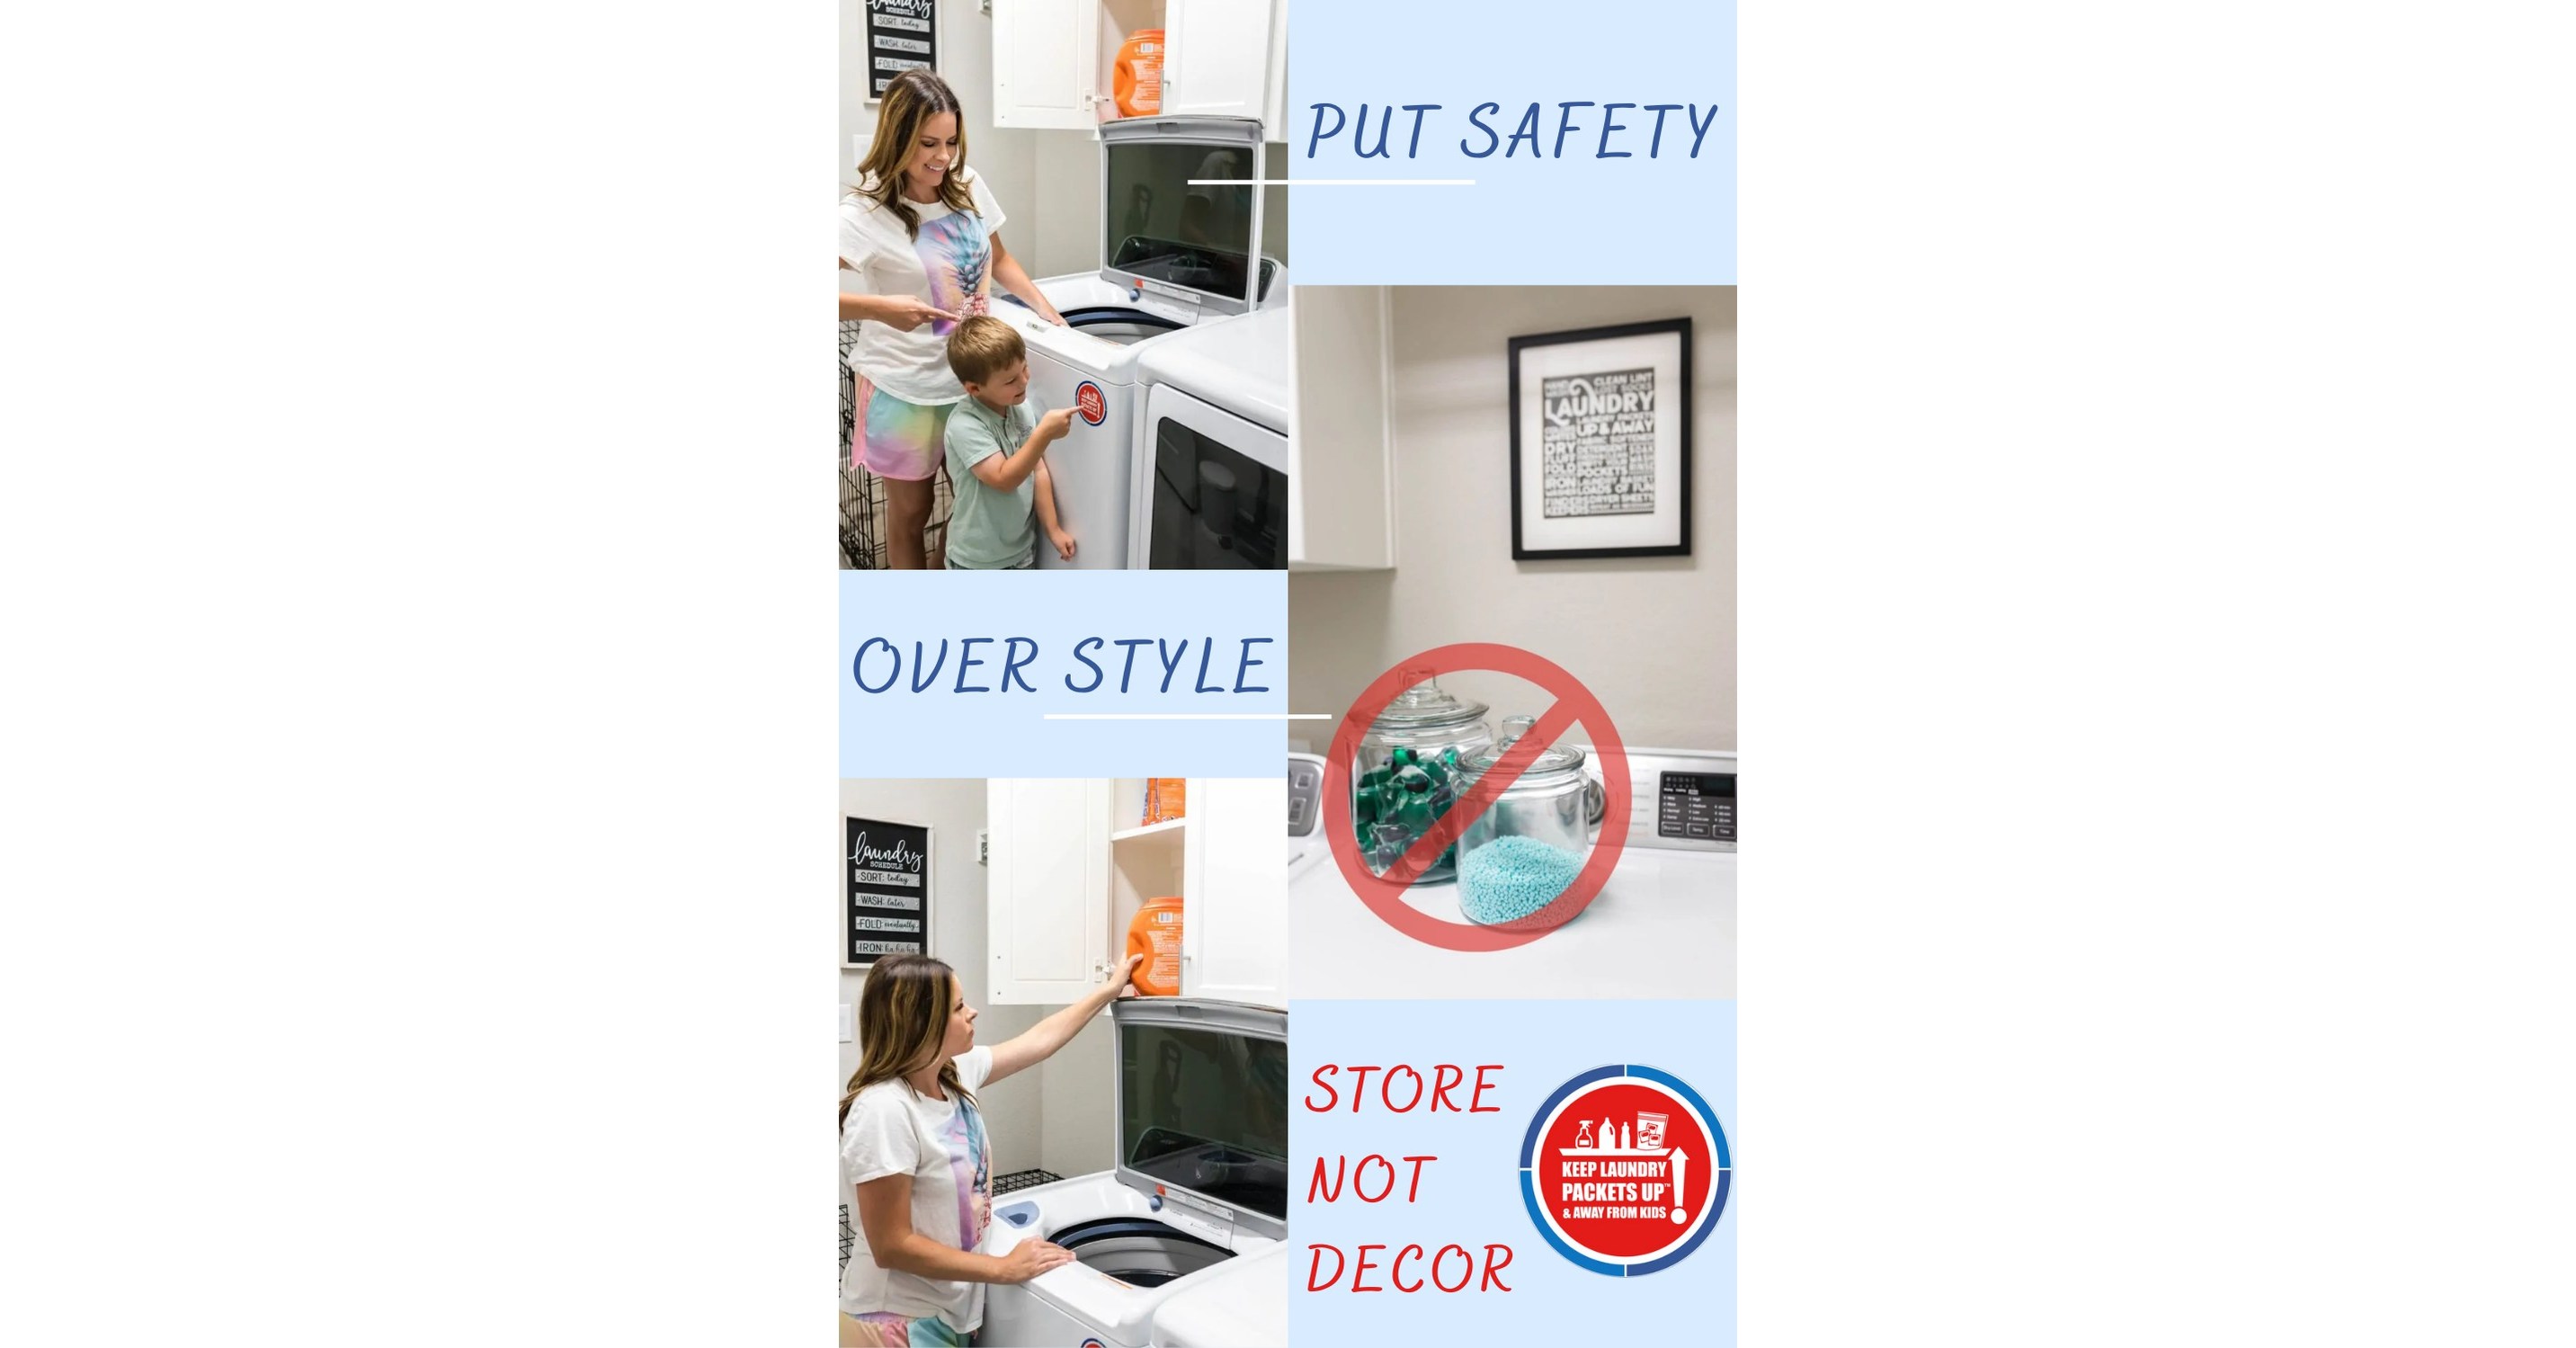 American Cleaning Institute Urges Social Media Platforms to Take a Stand Against Unsafe Home Organization Visuals